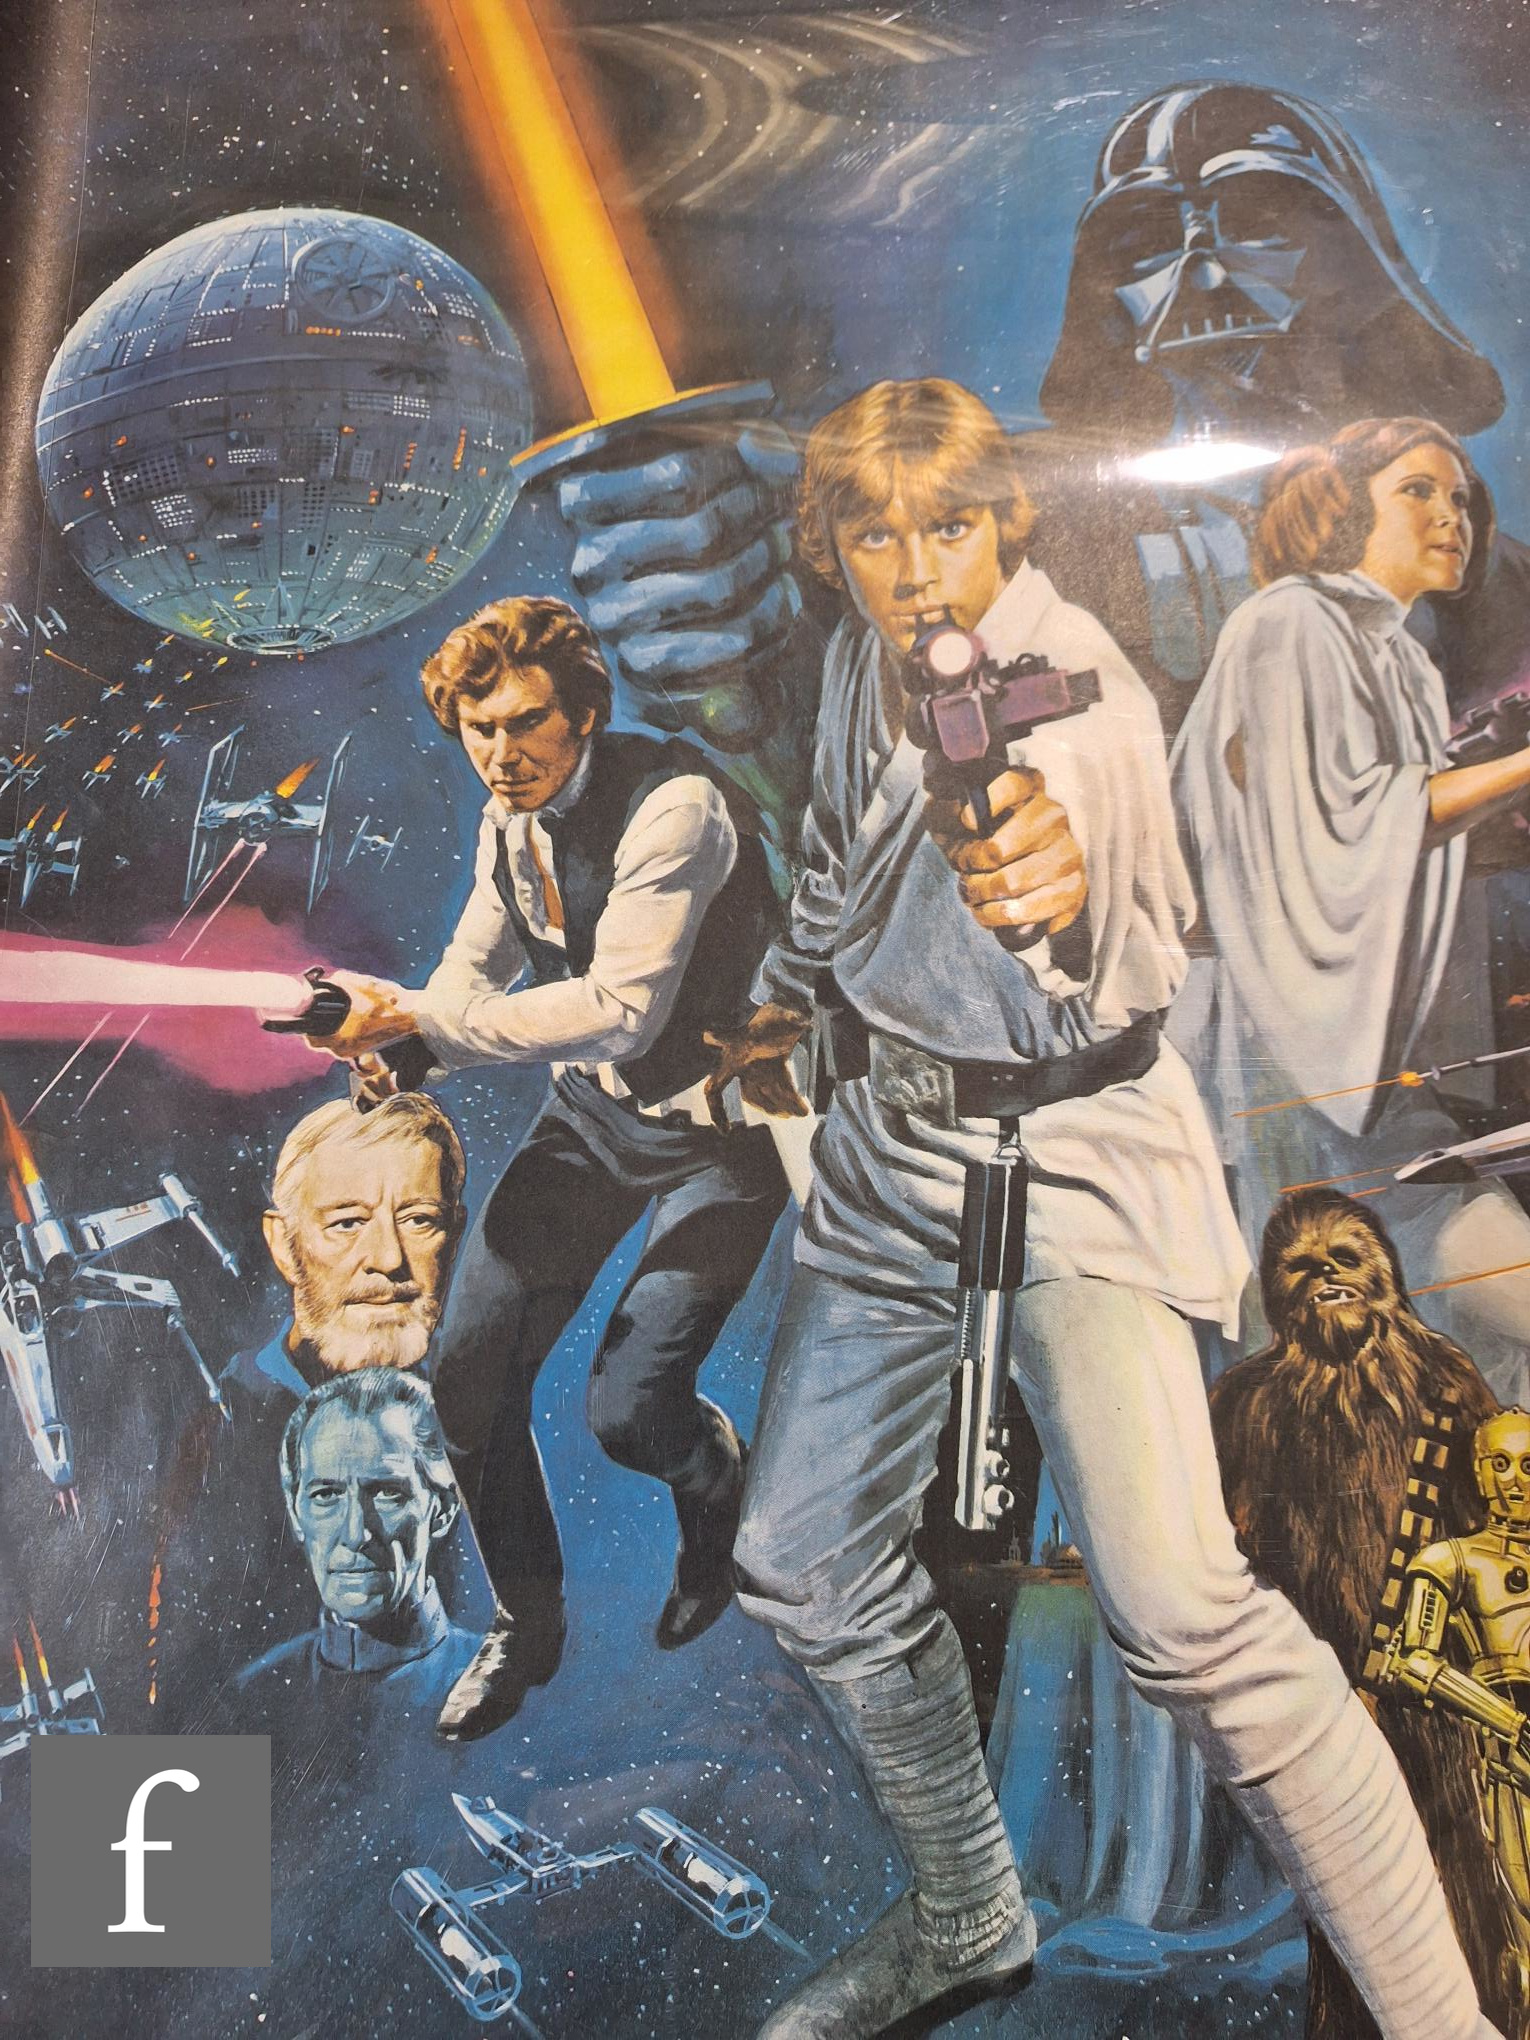 A Star Wars (1977) British Quad film poster, Academy Awards version, artwork by Tom Chantrell, - Image 5 of 9